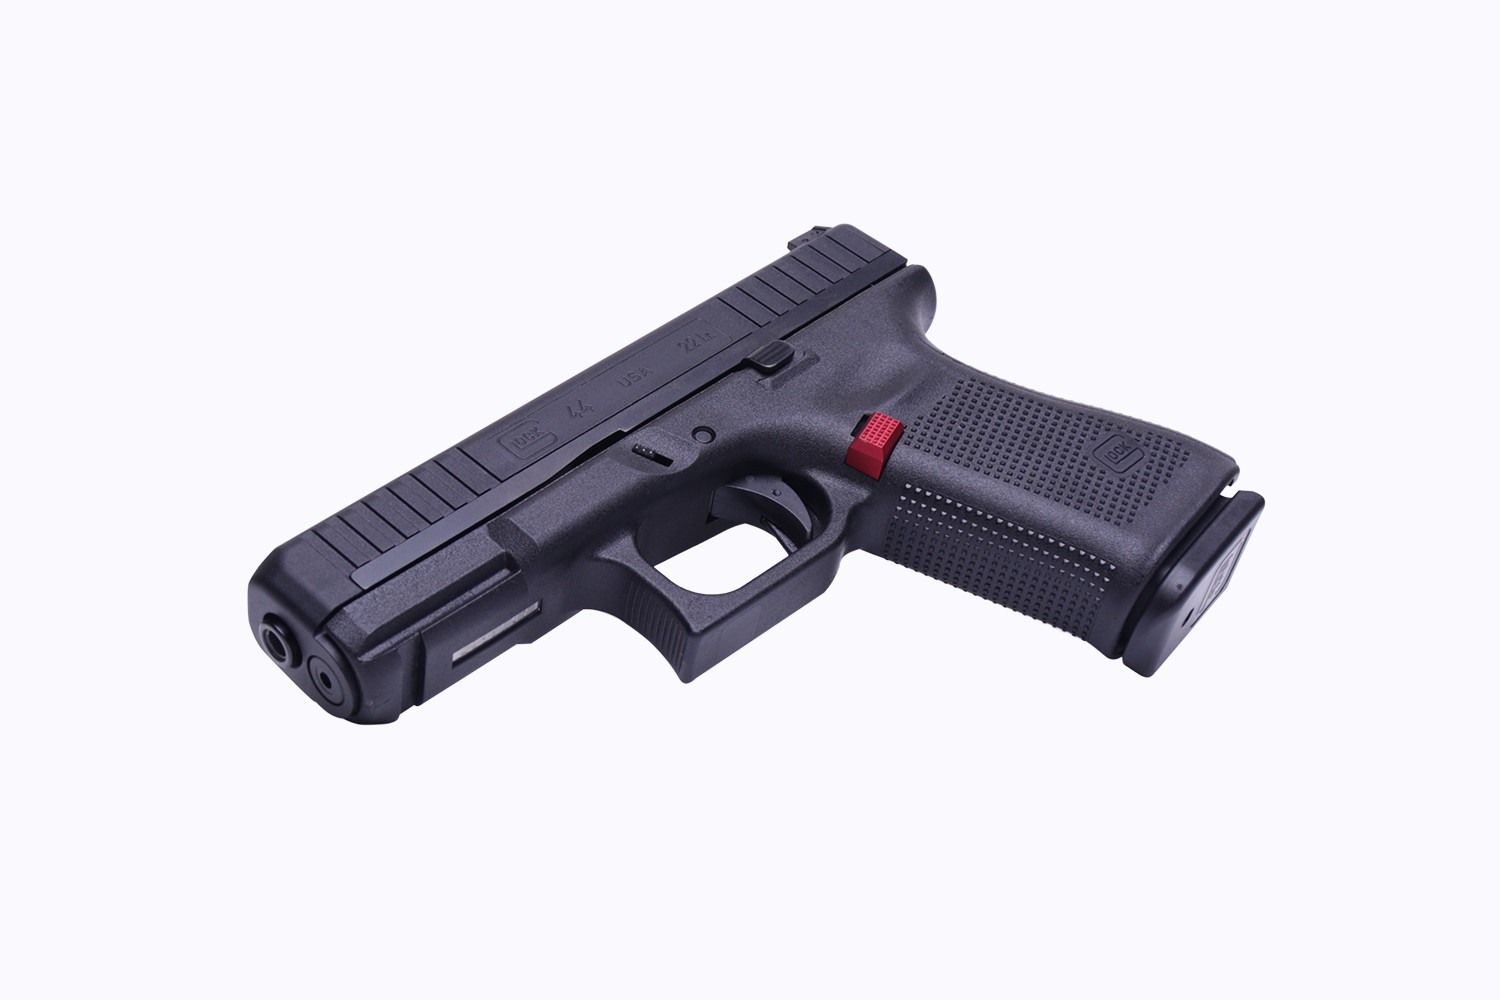 glock 40 with extended clip